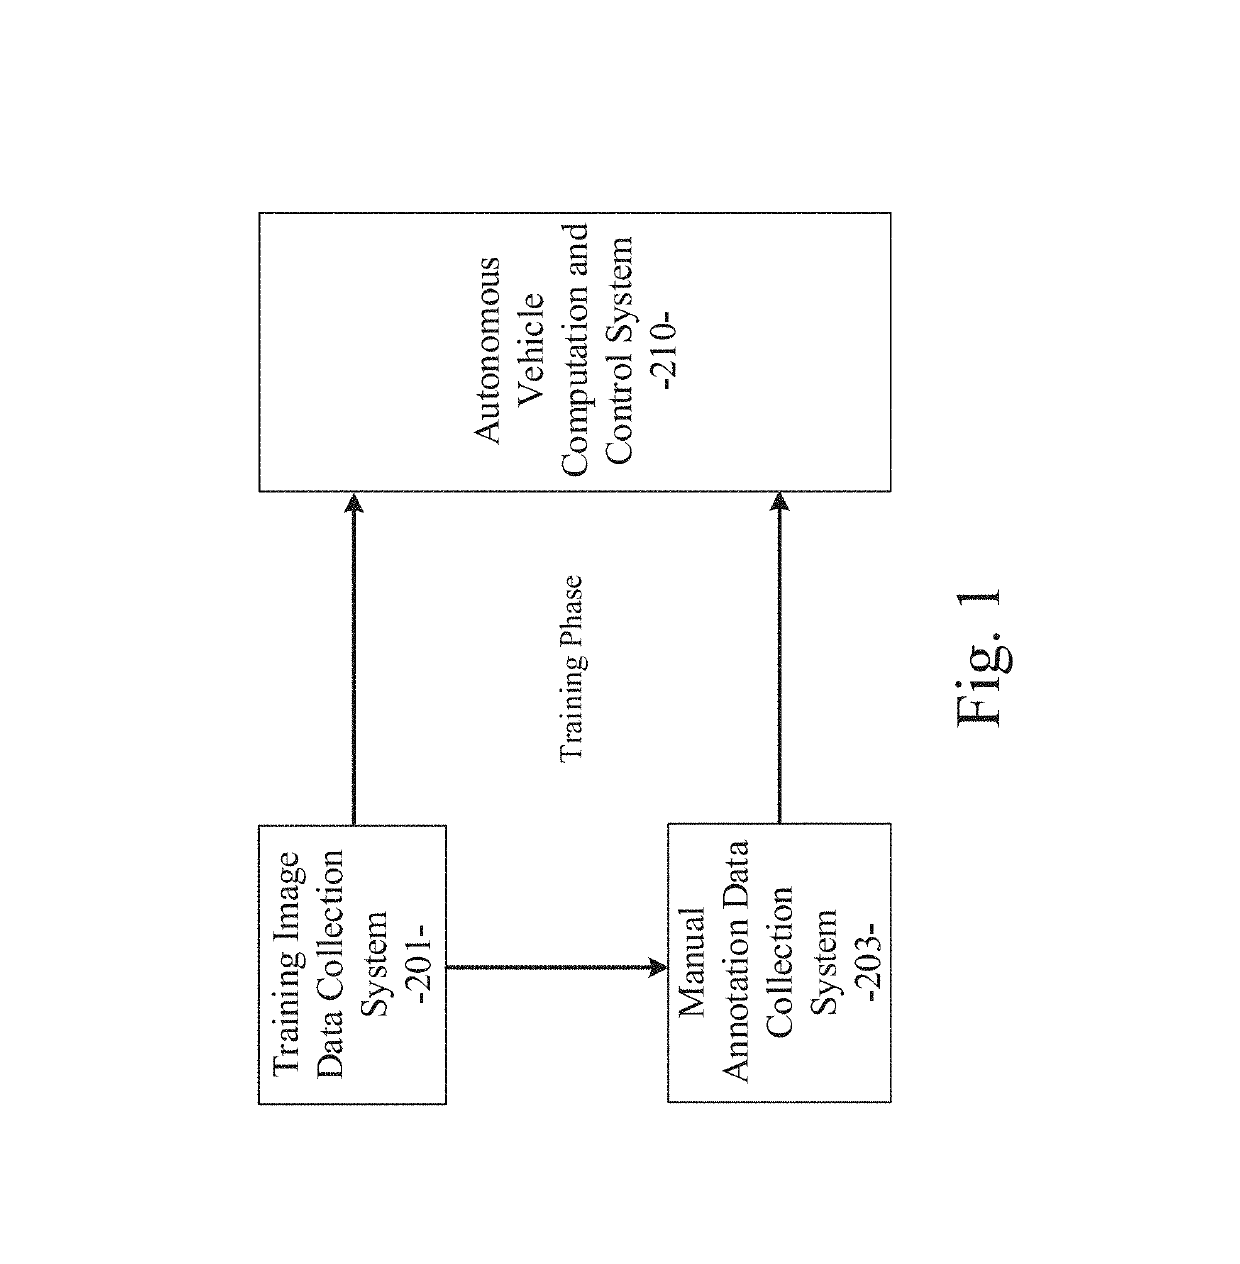 System and method for instance-level lane detection for autonomous vehicle control